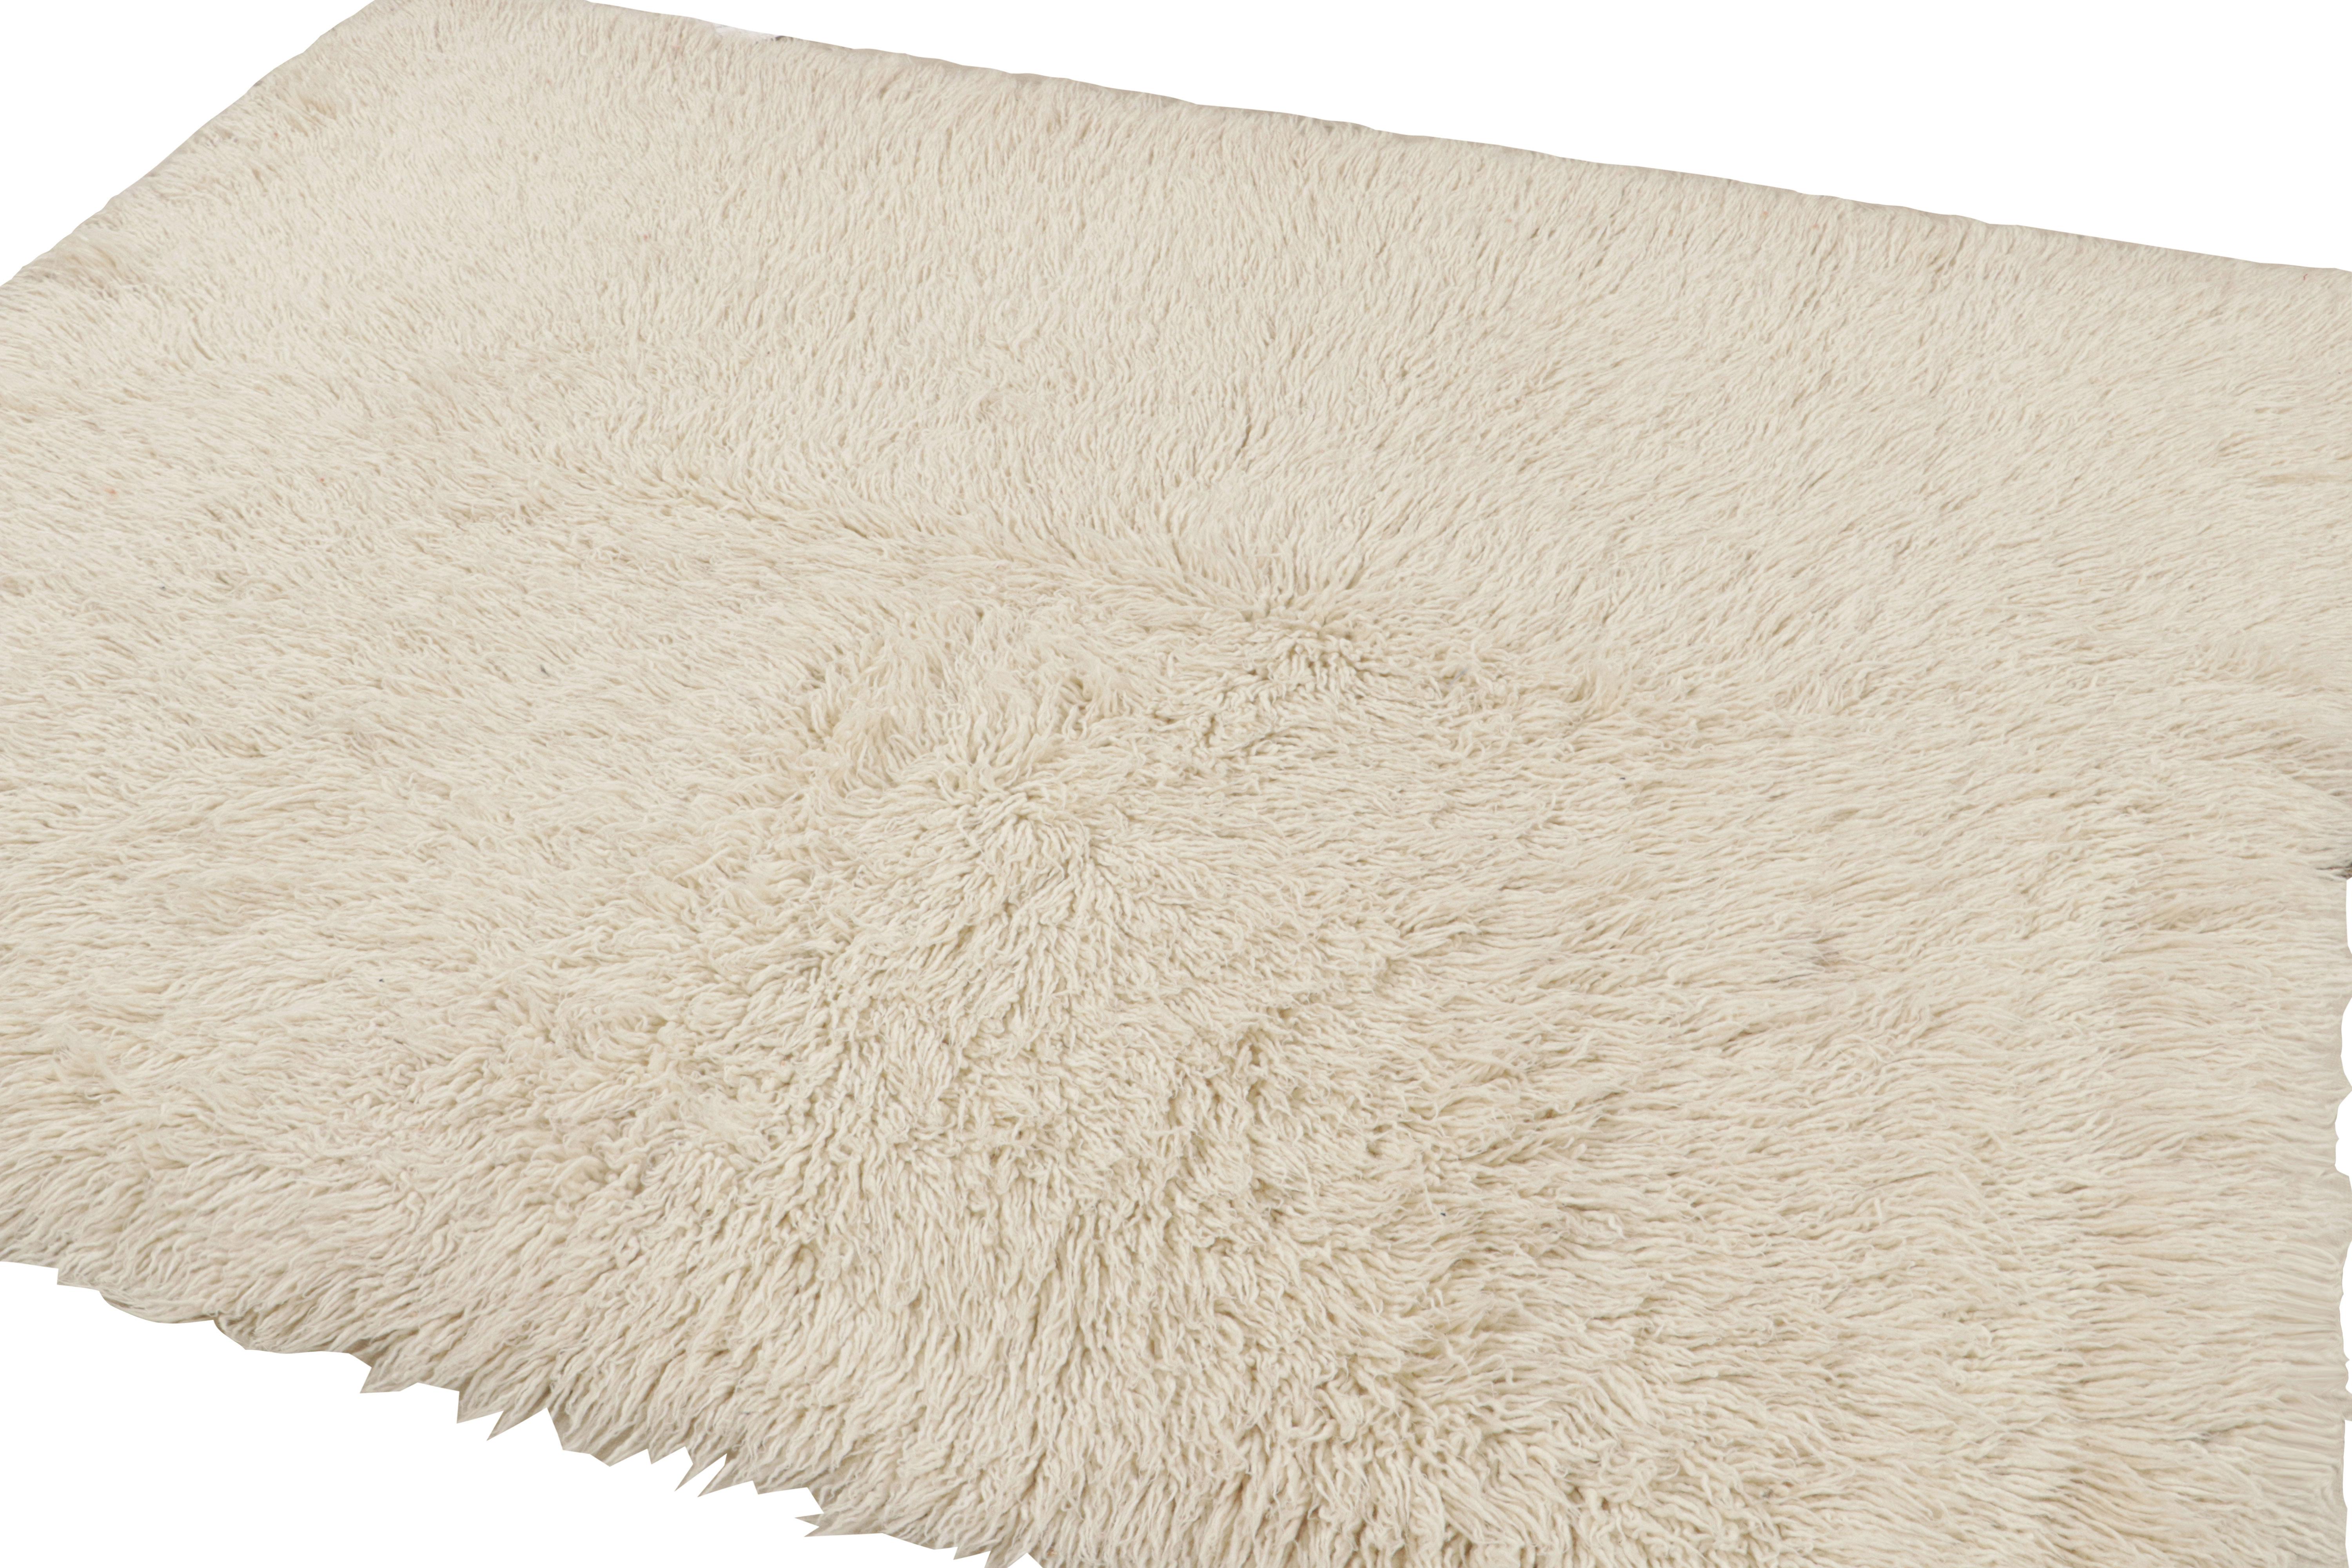 Hand-knotted in wool, a vintage 6x7 Tulu rug from Turkey circa 1950-1960 - latest to join Rug & Kilim’s vintage selections.

On the Design:

The luxurious piece enjoys off white and beige tones in a shaggy high pile. The subtle colorplay and the